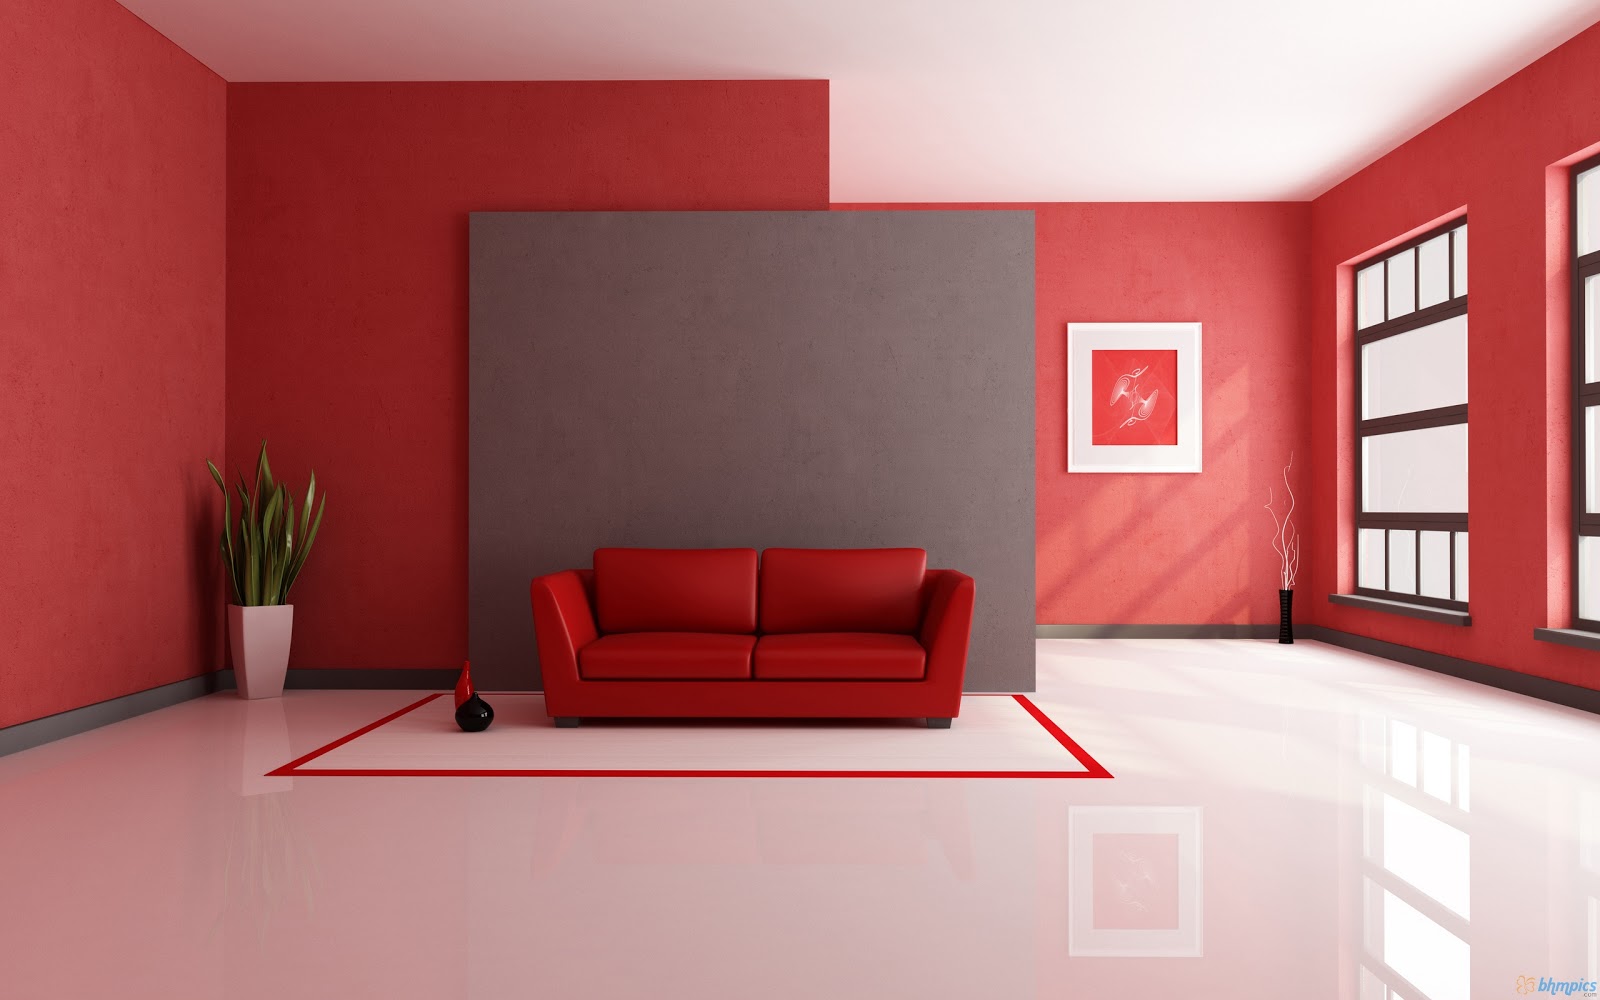  Free Download Red Interior Design Wallpapers Red Interior Design